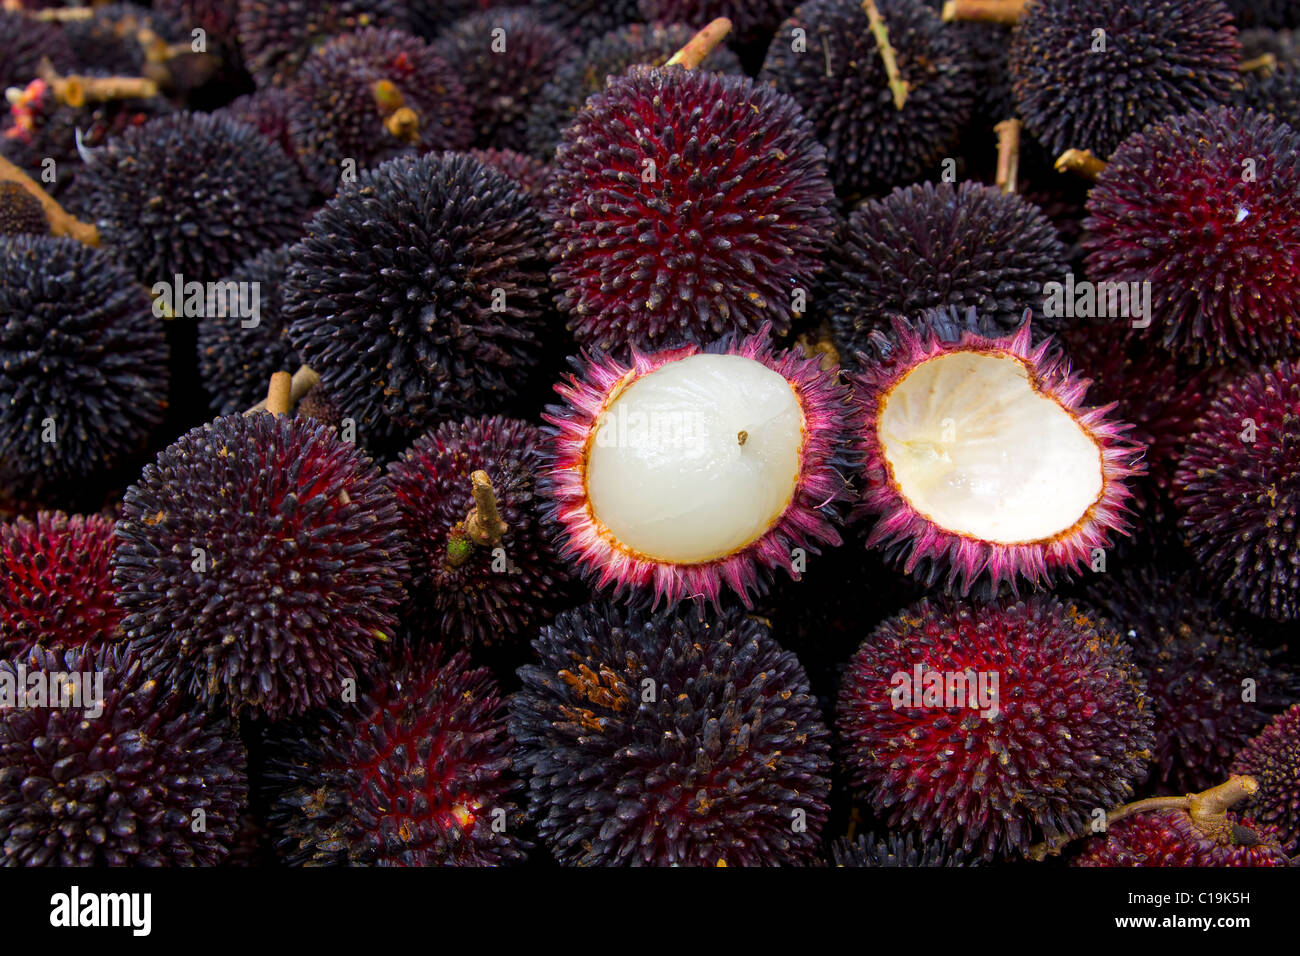 Buah Pulasan Fruit on Vendor Stand in Tropical Country Stock Photo